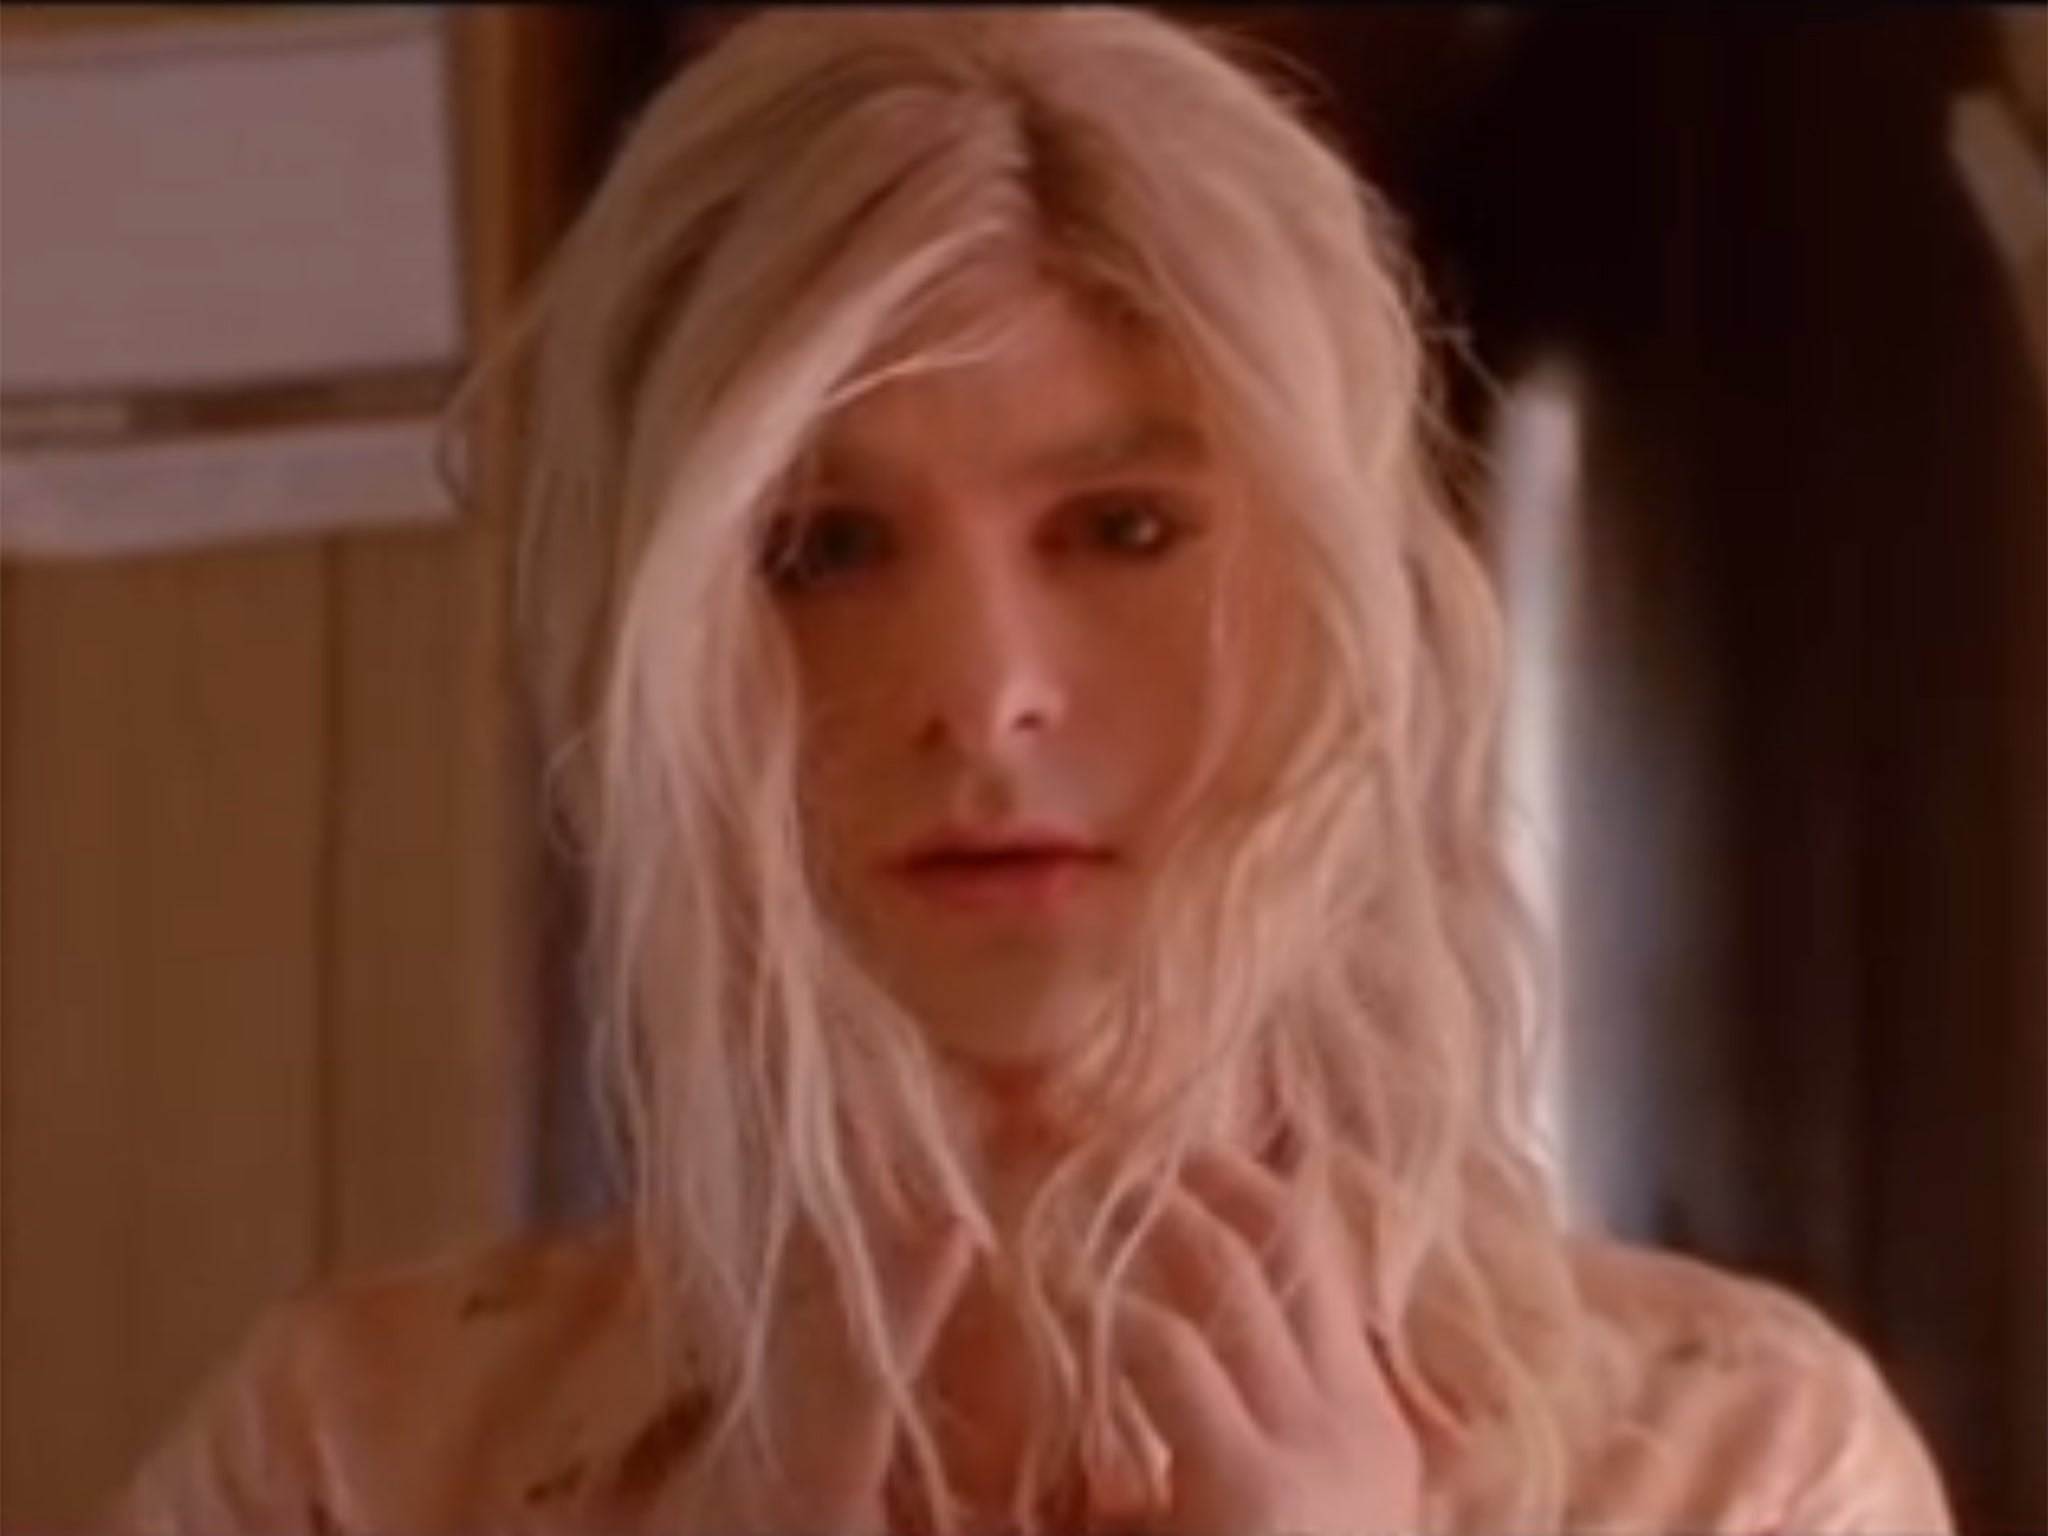 Andrew Garfield appears in drag in Arcade Fire's 'We Exist' music video